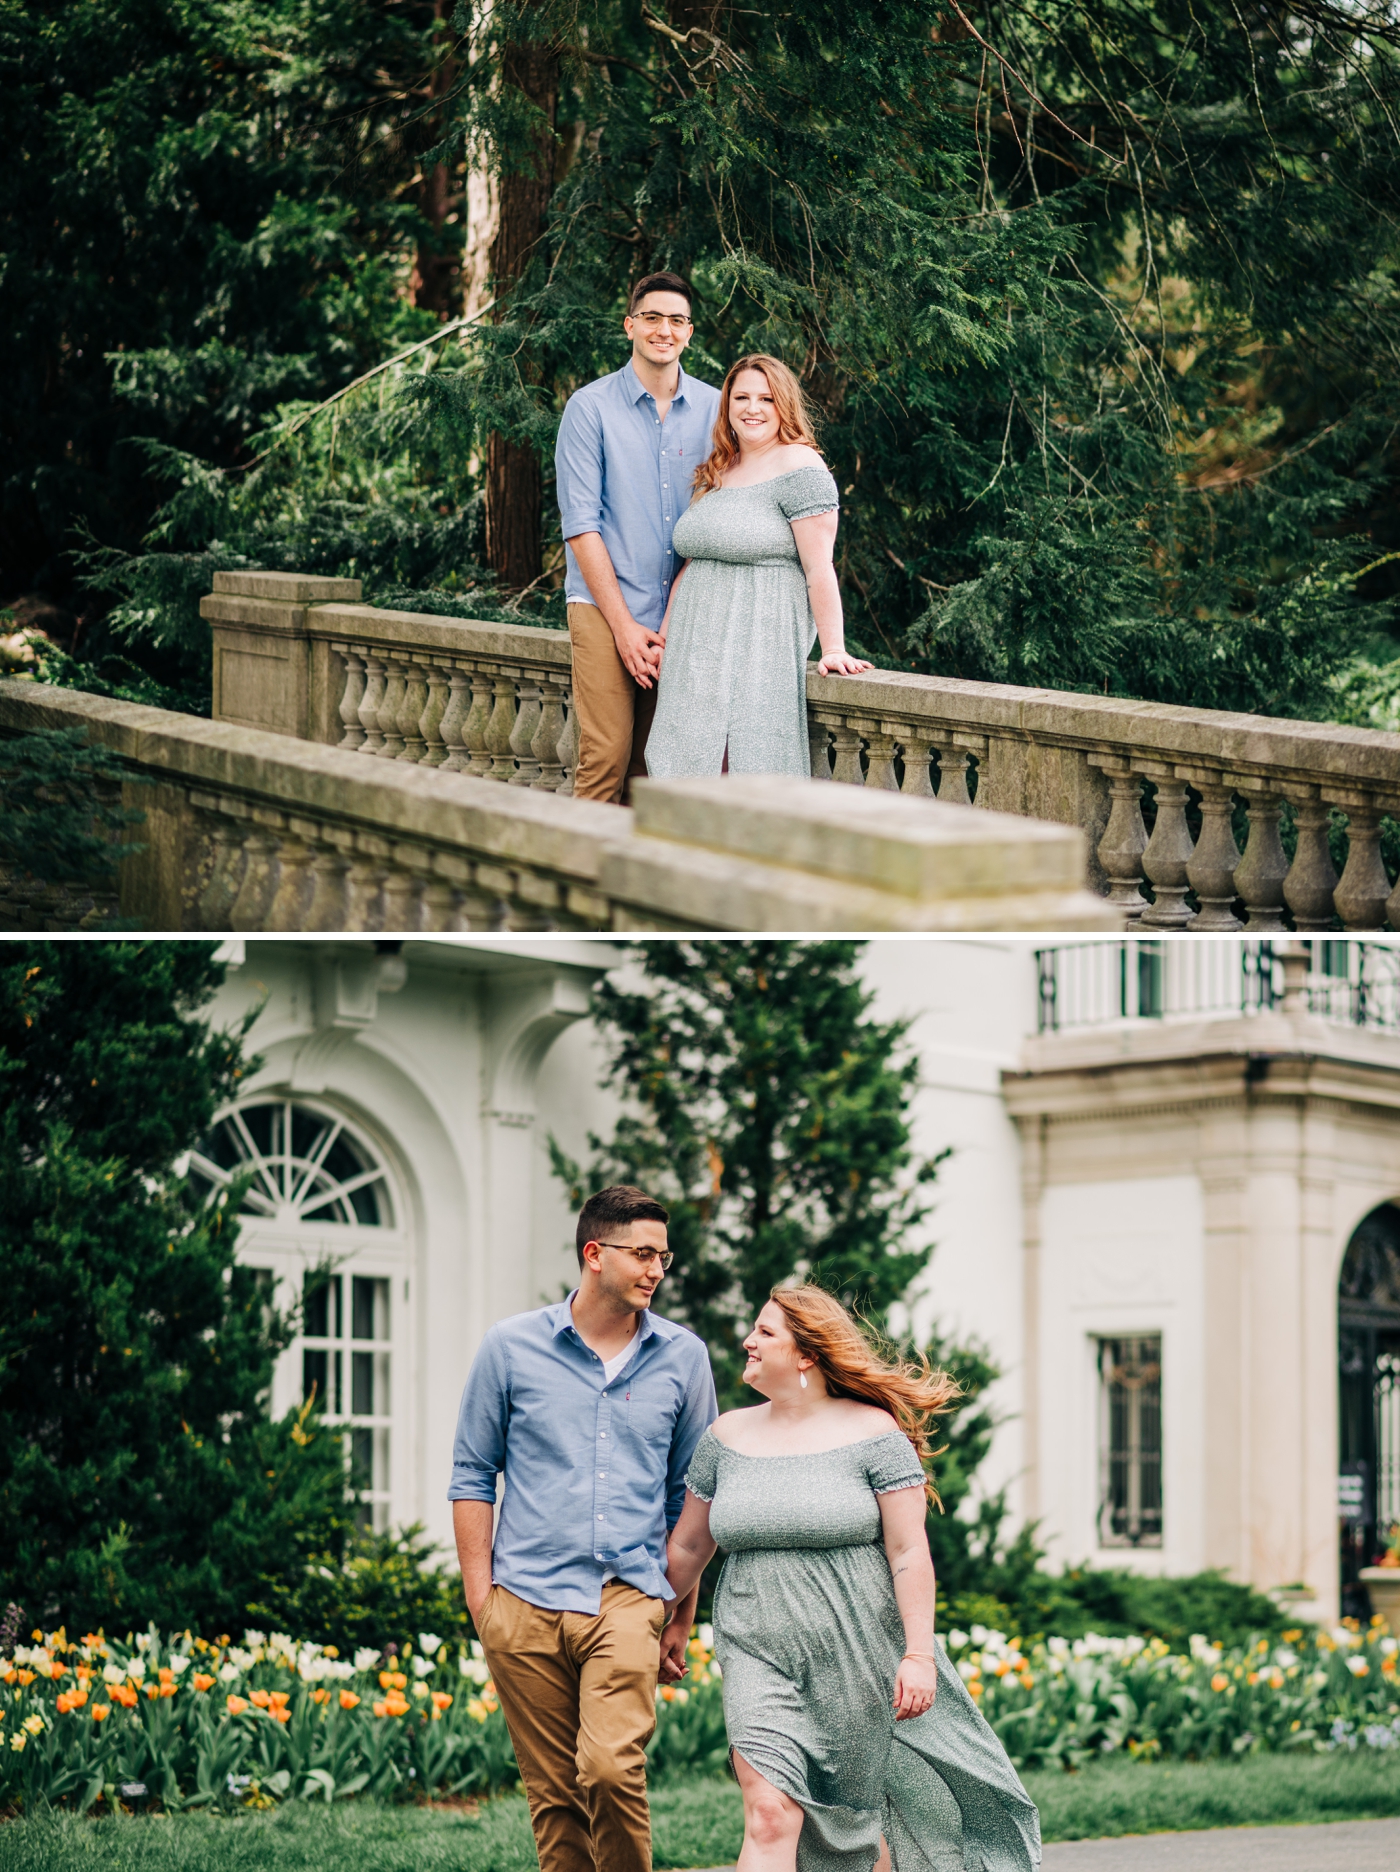 Indianapolis Engagement Session Locations